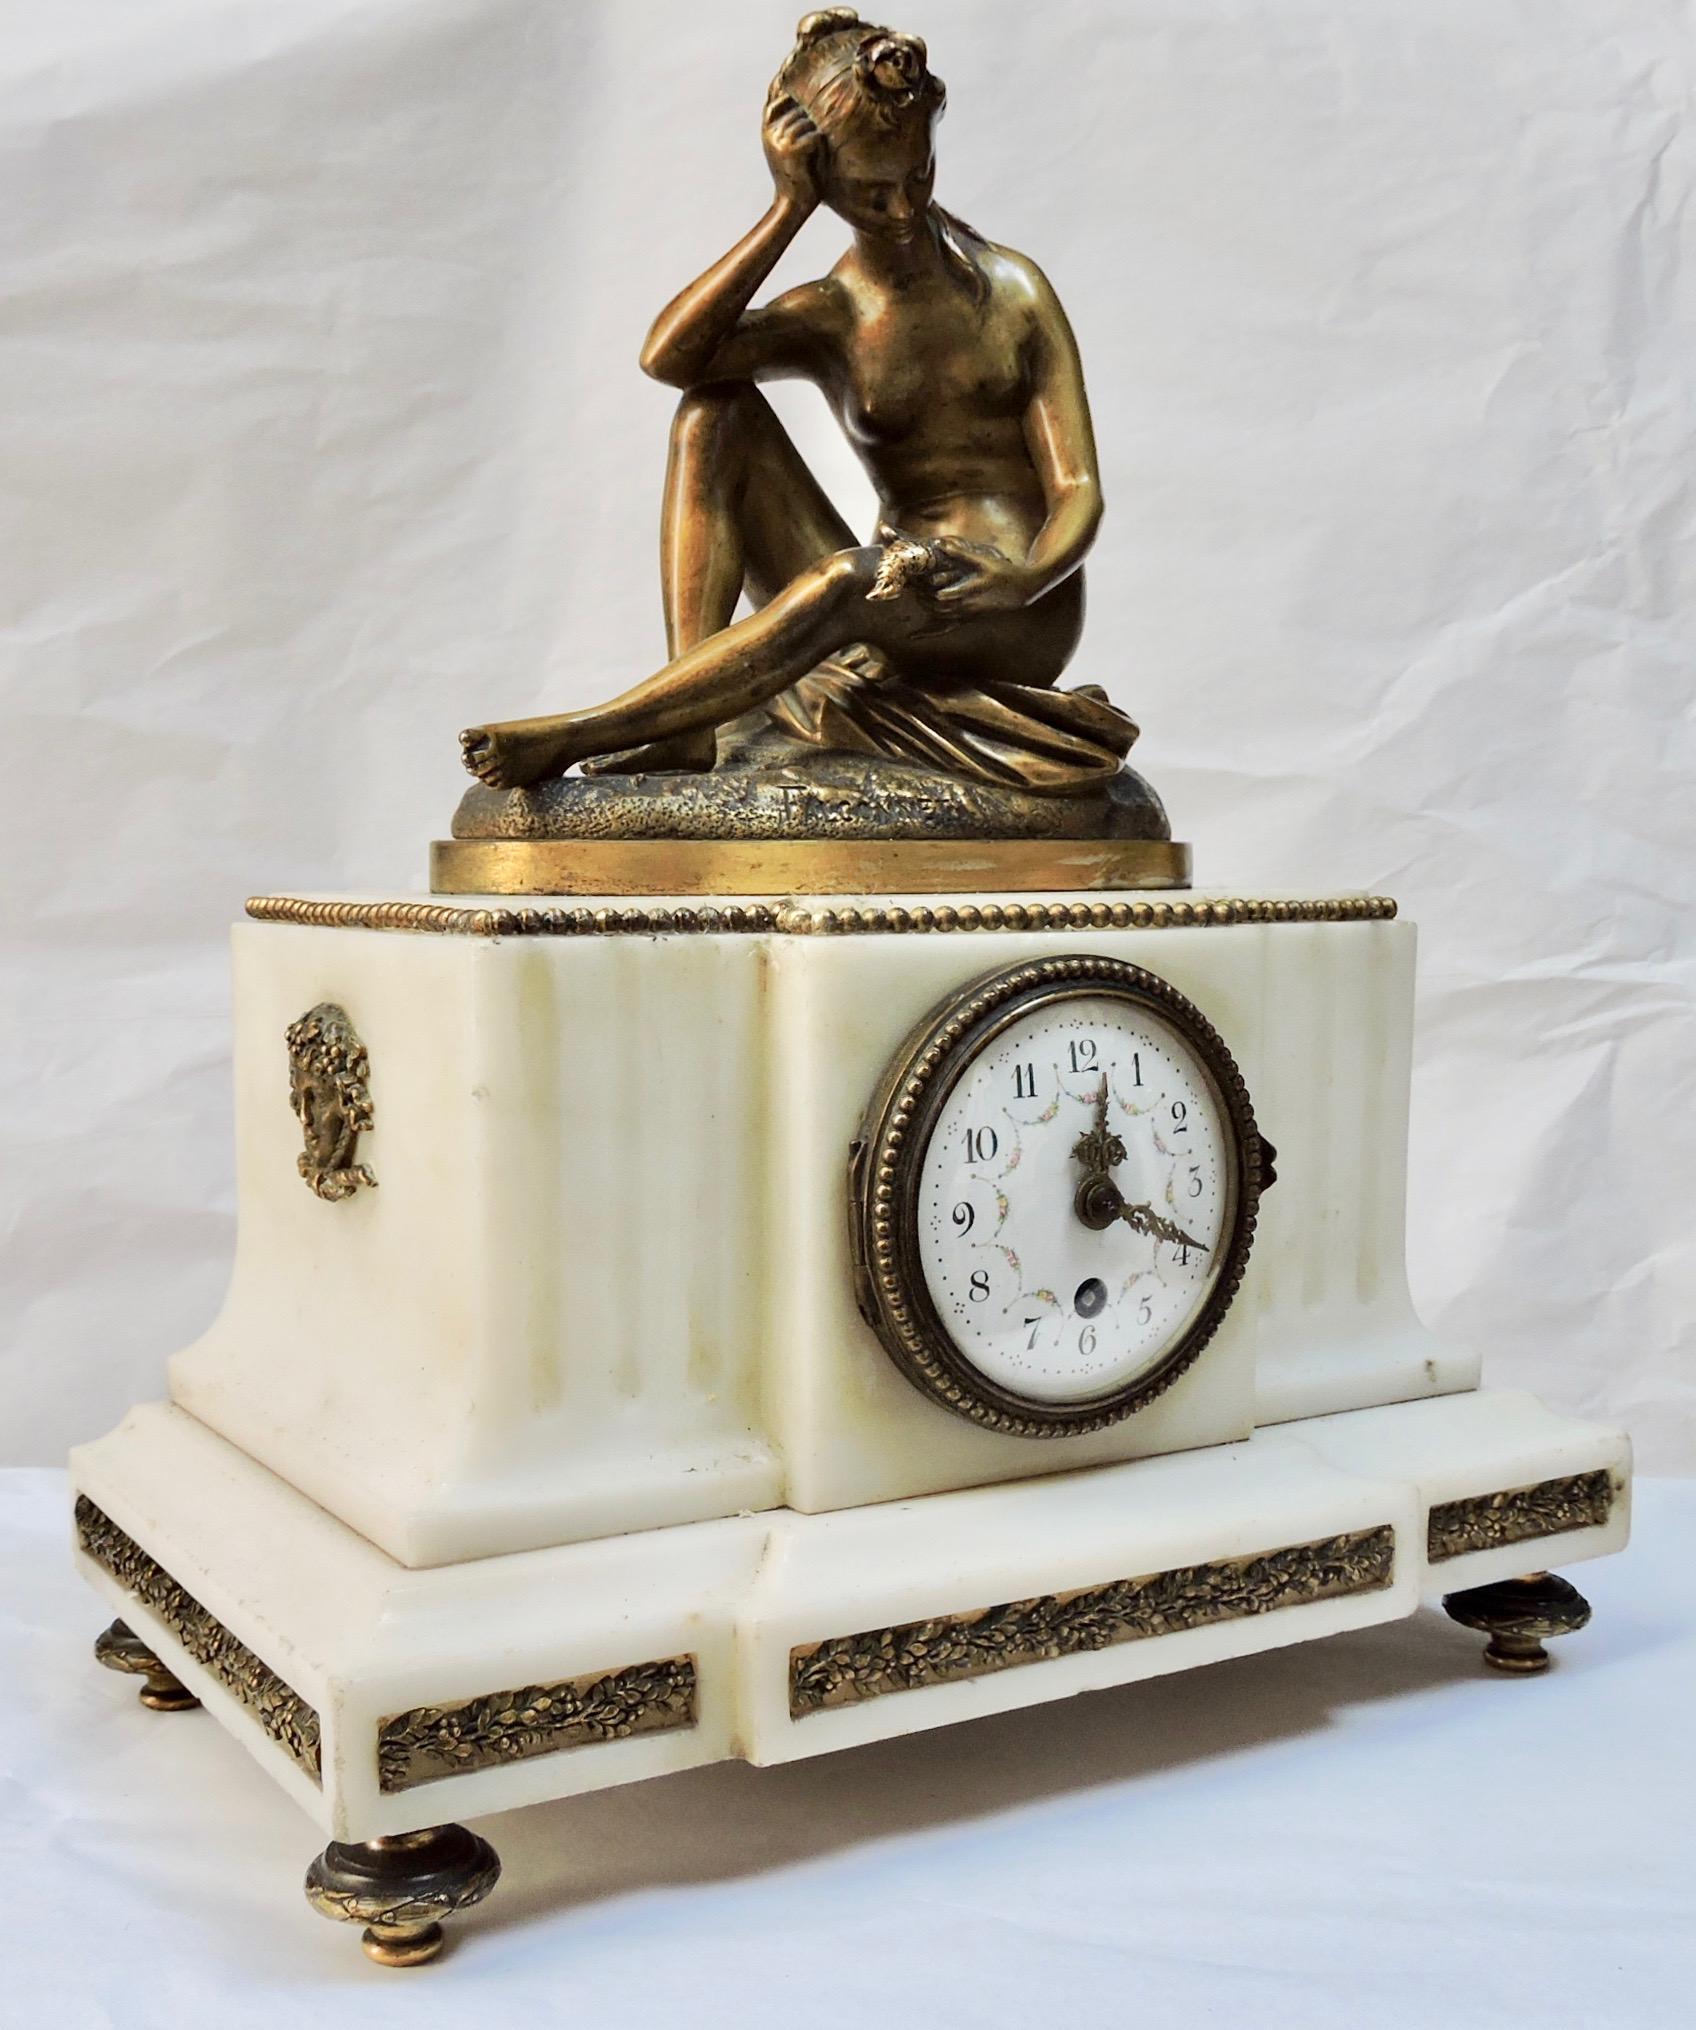 A French 19th century marble and ormolu clock
 The Carrare marble case surmounted by a bronze sculpture after Etienne Maurice Falconnet, 